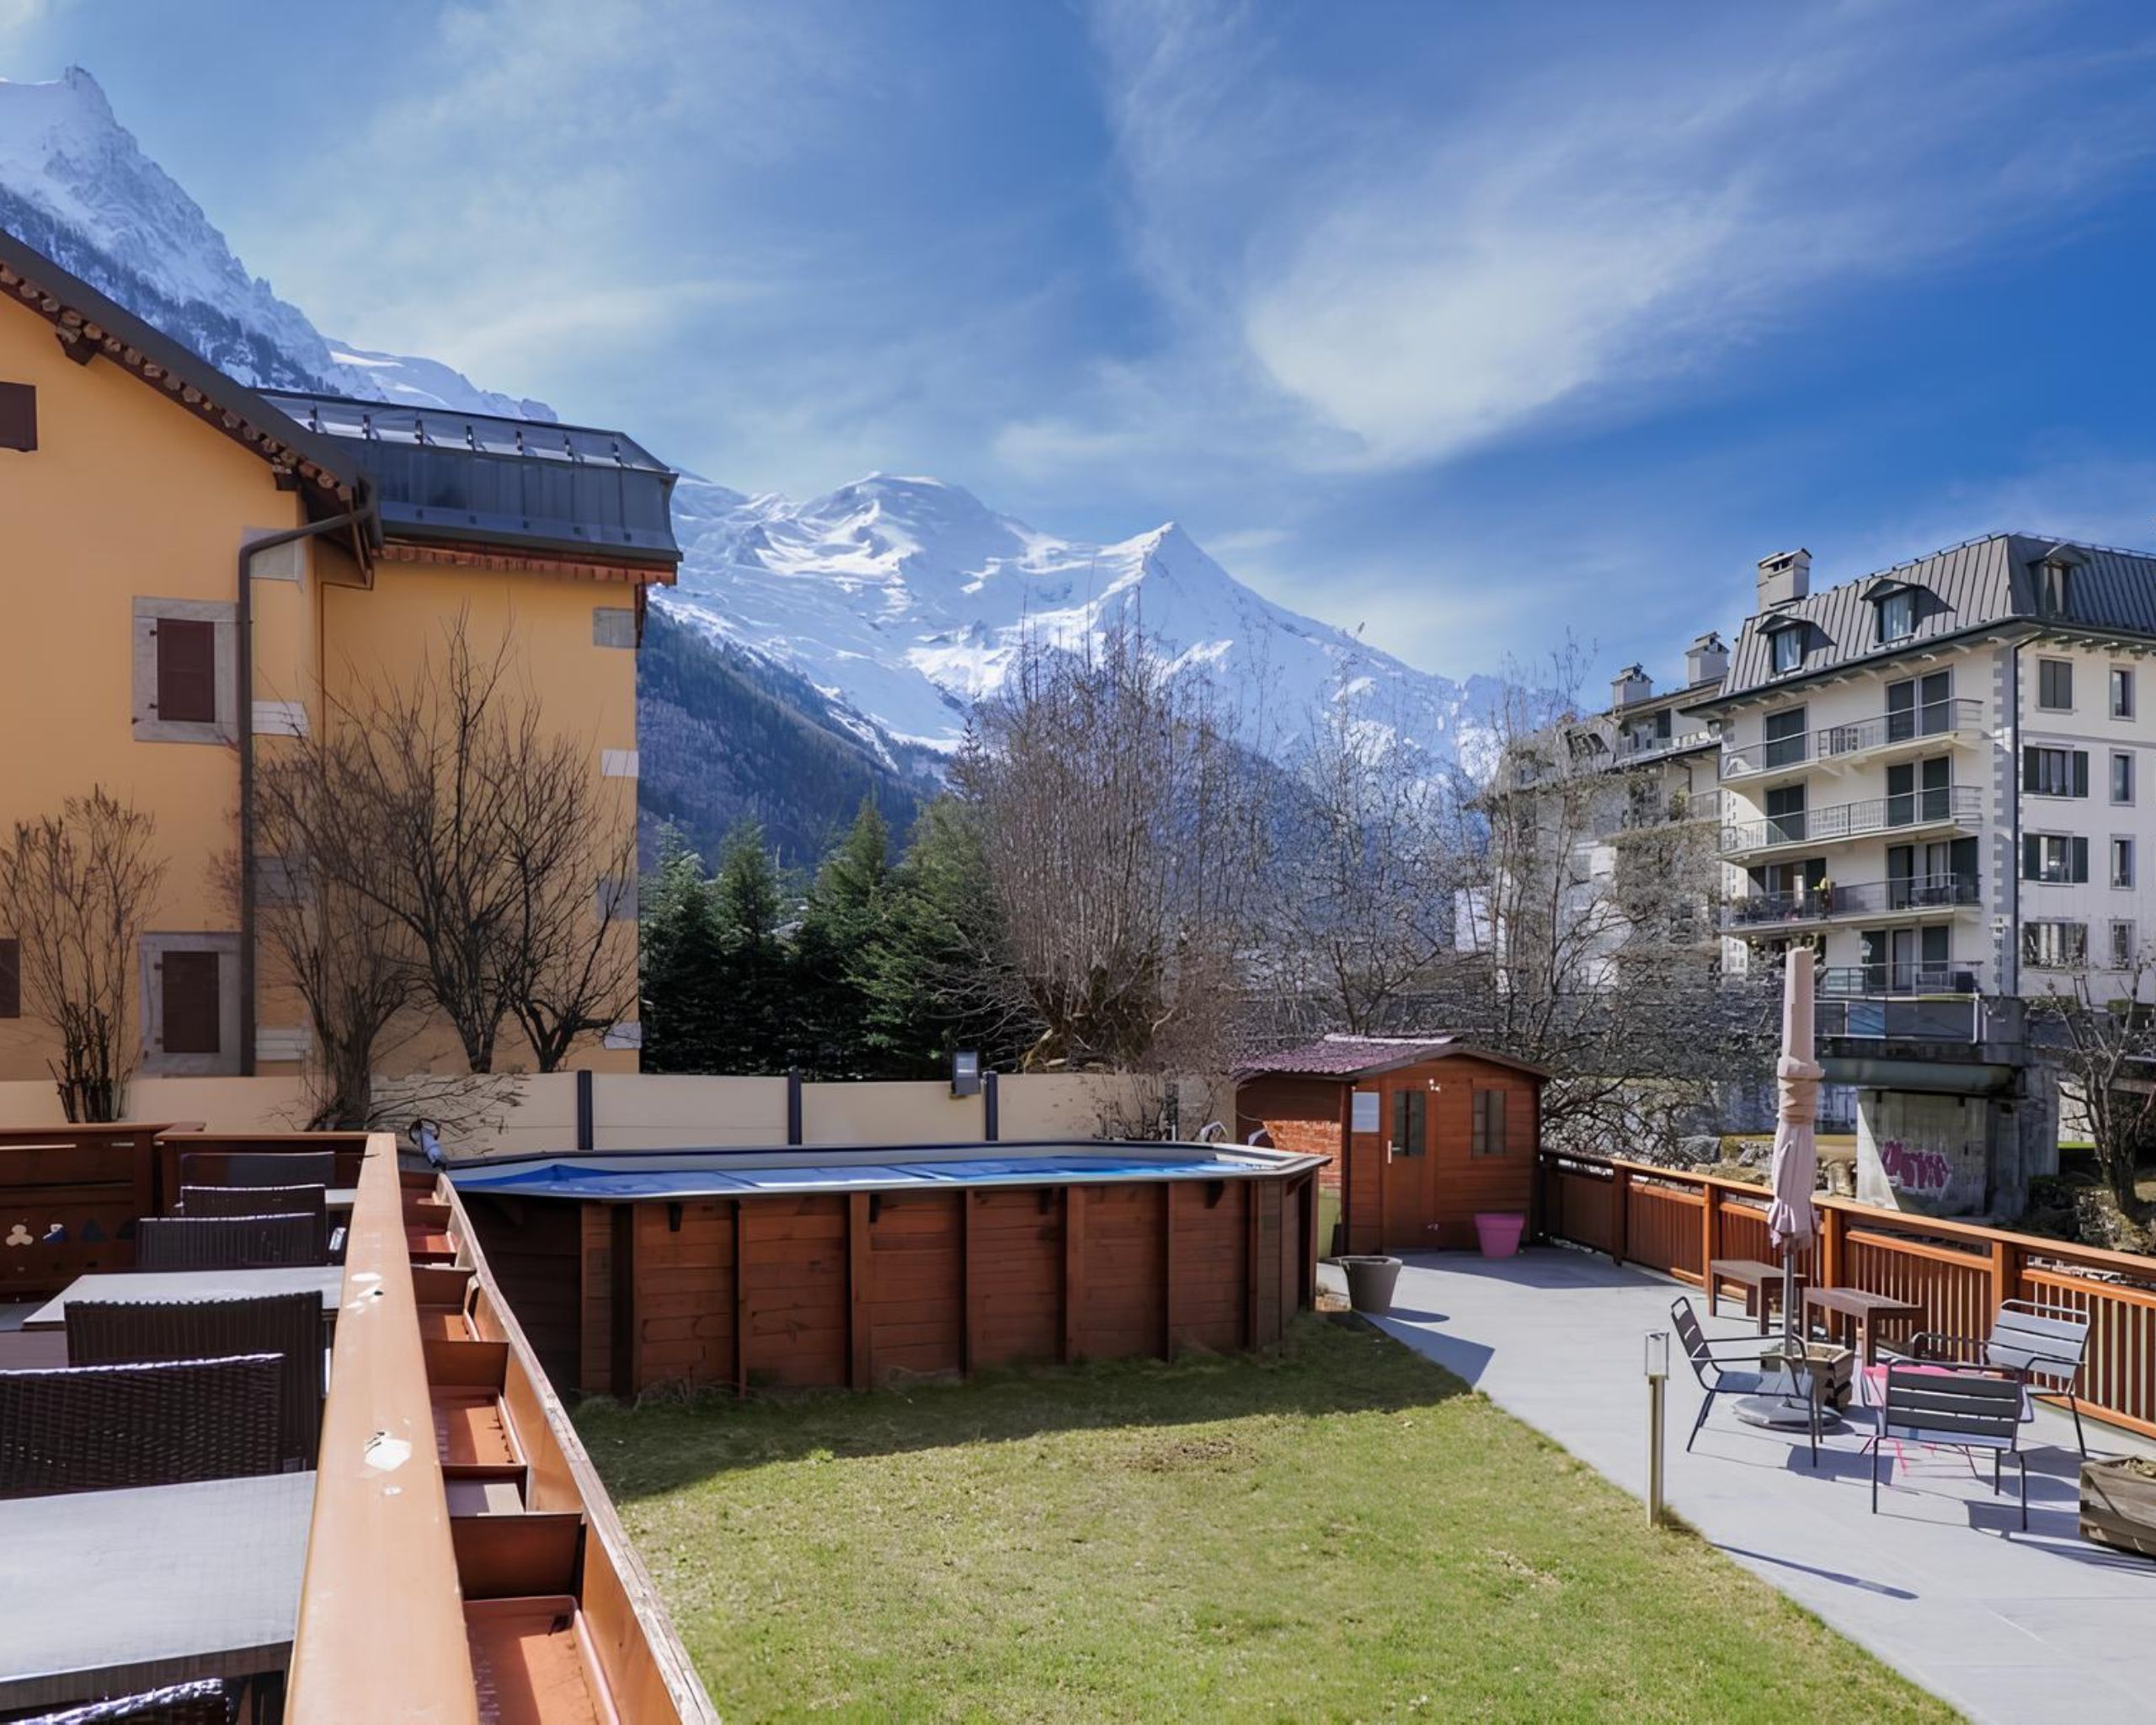 Terrace of the hotel Les Gourmets in Chamonix facing Mont-Blanc